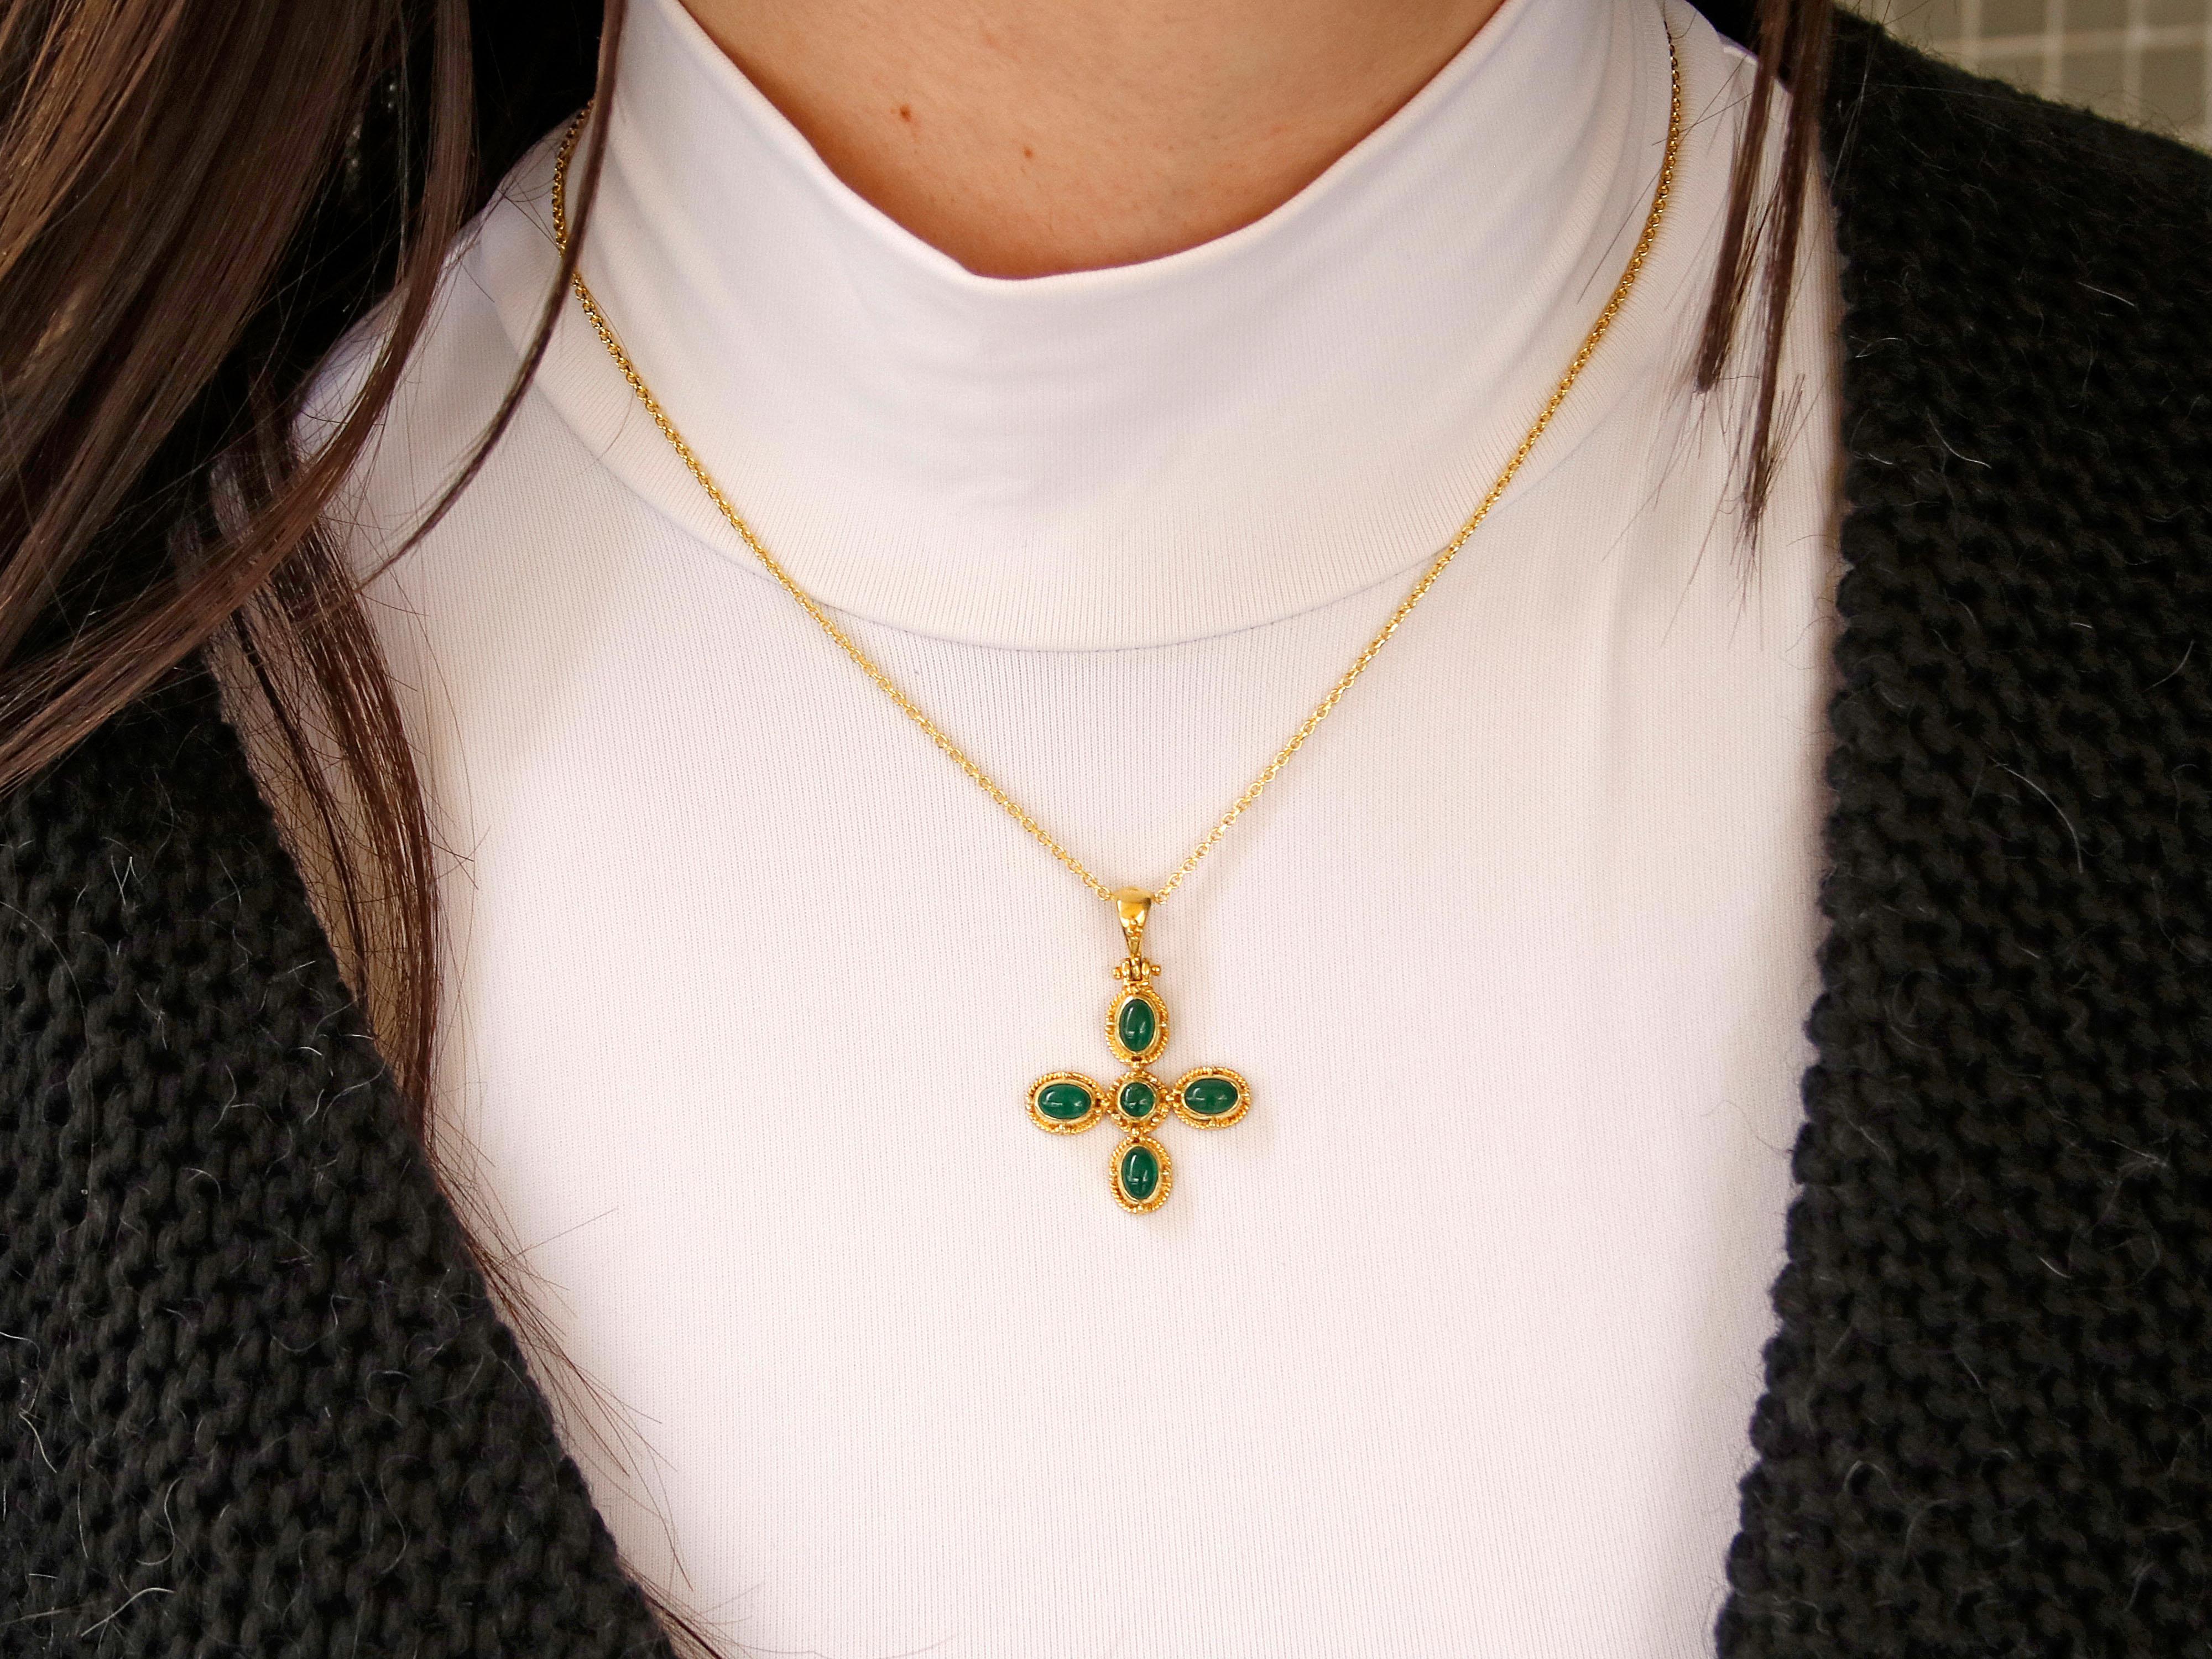 18k gold Byzantine Inspired Cross that showcases intricate design and craftsmanship. This cross features a combination of cabochon emeralds, granulation, and filigree decoration, adding to its luxurious appeal. Emeralds are used as accent stones in